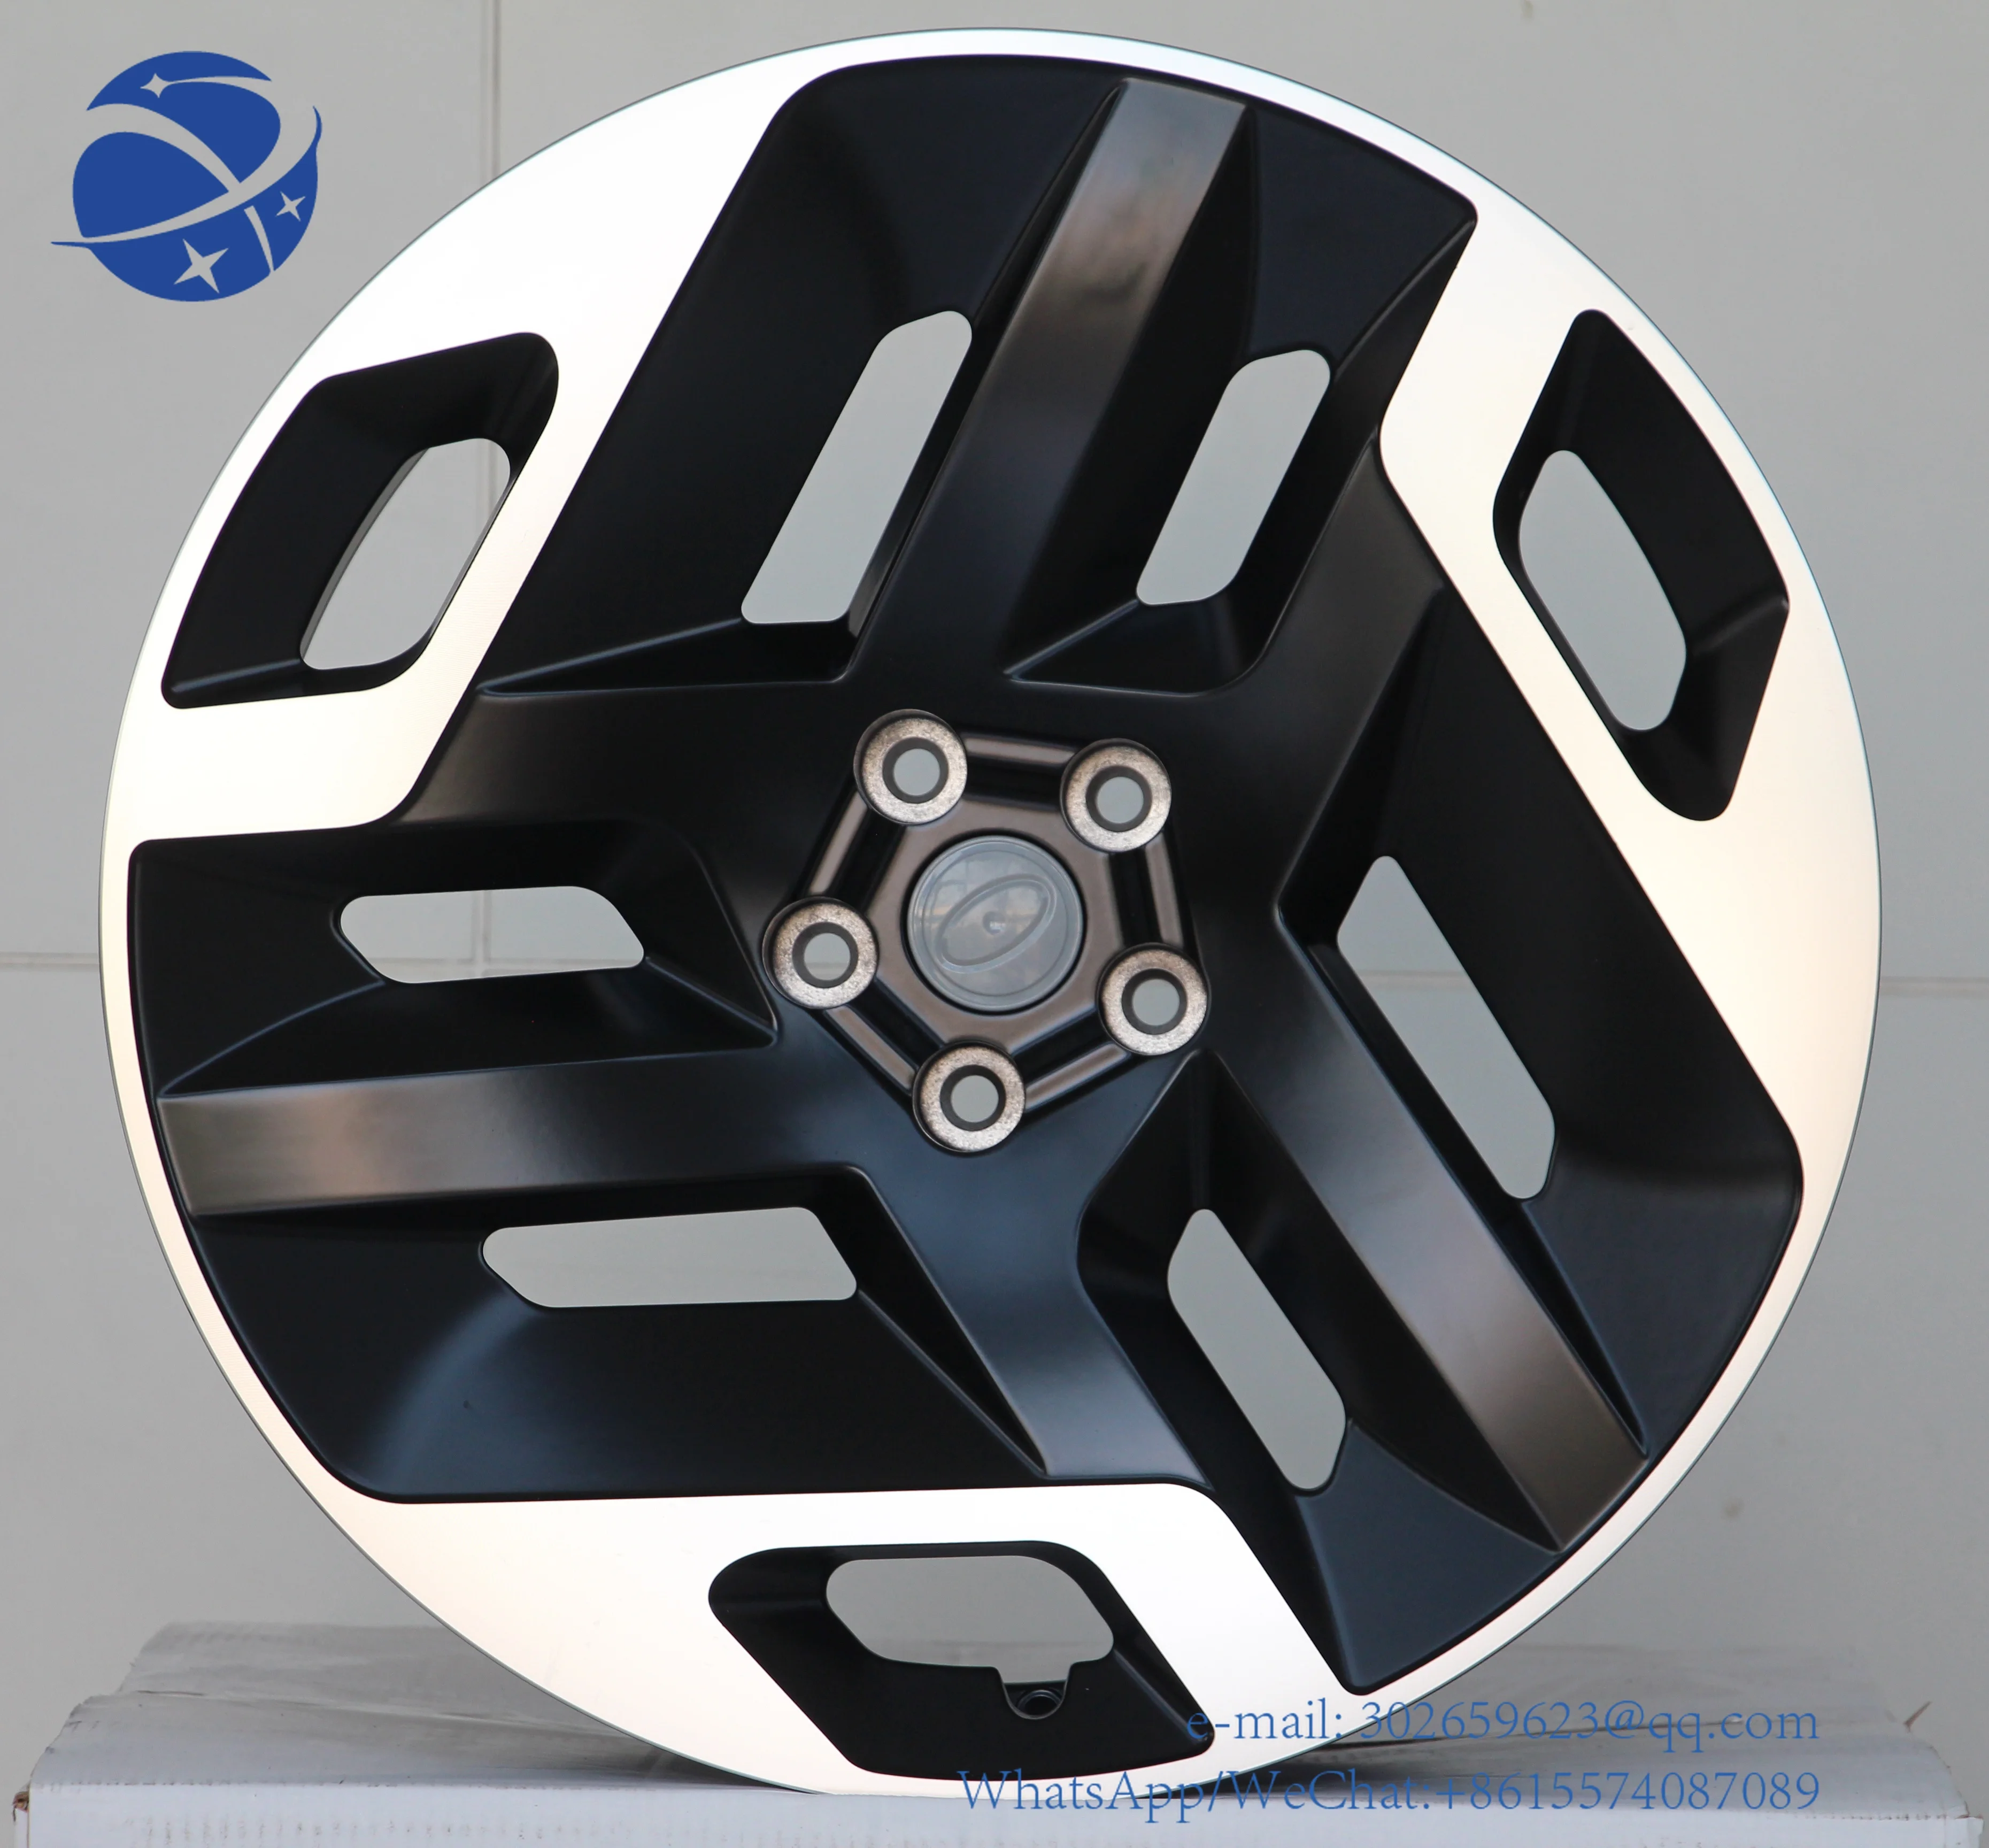 

yyhc Chinese Factory 22 inch rims 5X120 alloy Concave Design Custom SUV Luxury Passenger Car Wheels For range rover sport